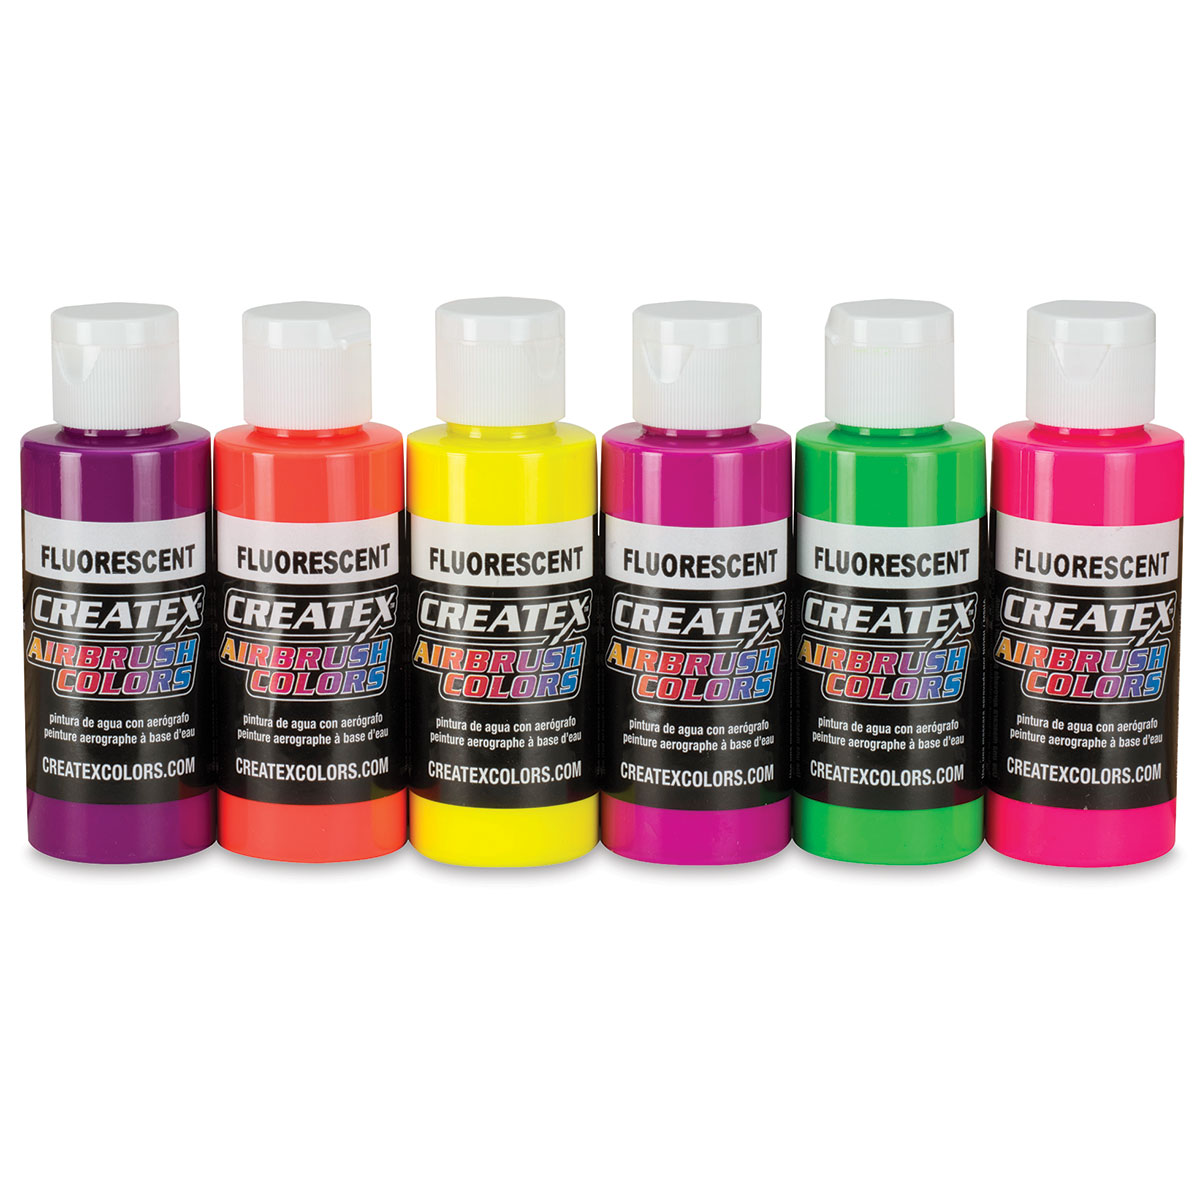 24 Colors Airbrush Paint Set,Opaque & Water-based Acrylic Air Brush Paint  Kit Includes Metallic and Neon Colors, Premium Airbrush Paints for Artists